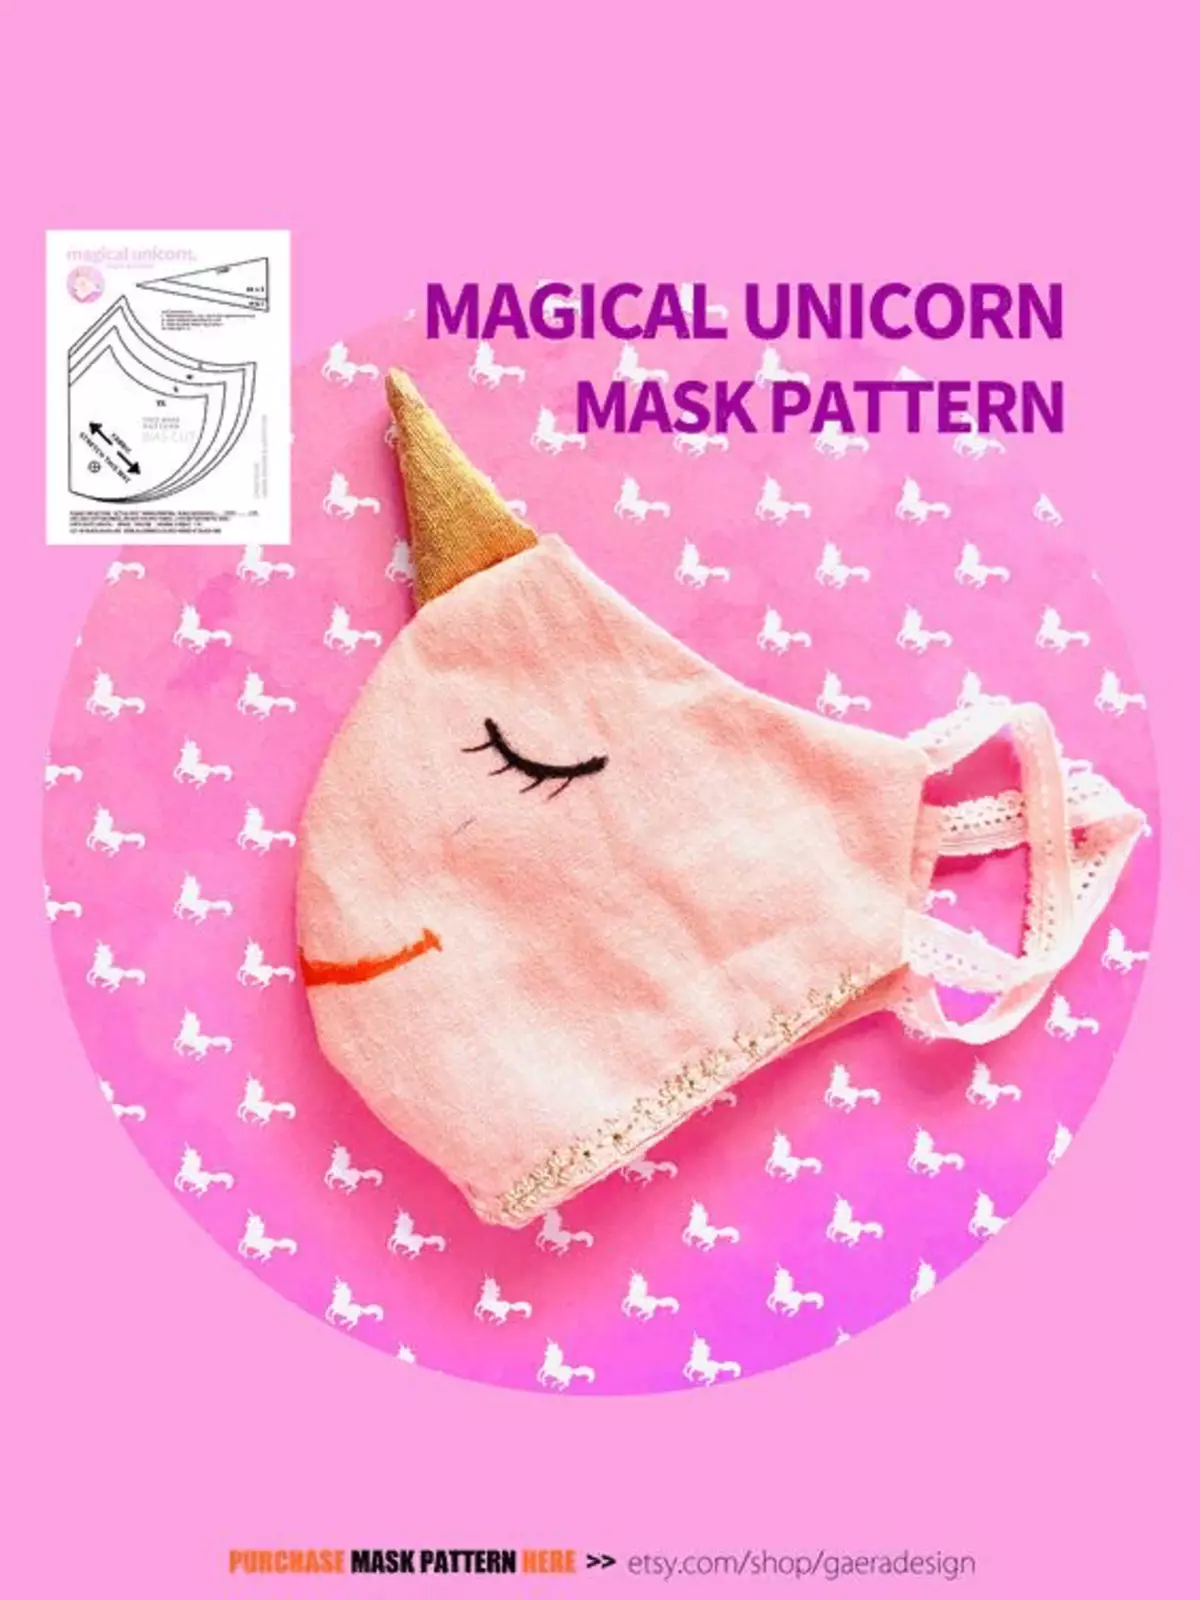 https://www.etsy.com/listing/810980635/magical-unicorn-mask-pattern-instant?ref=shop_home_active_1